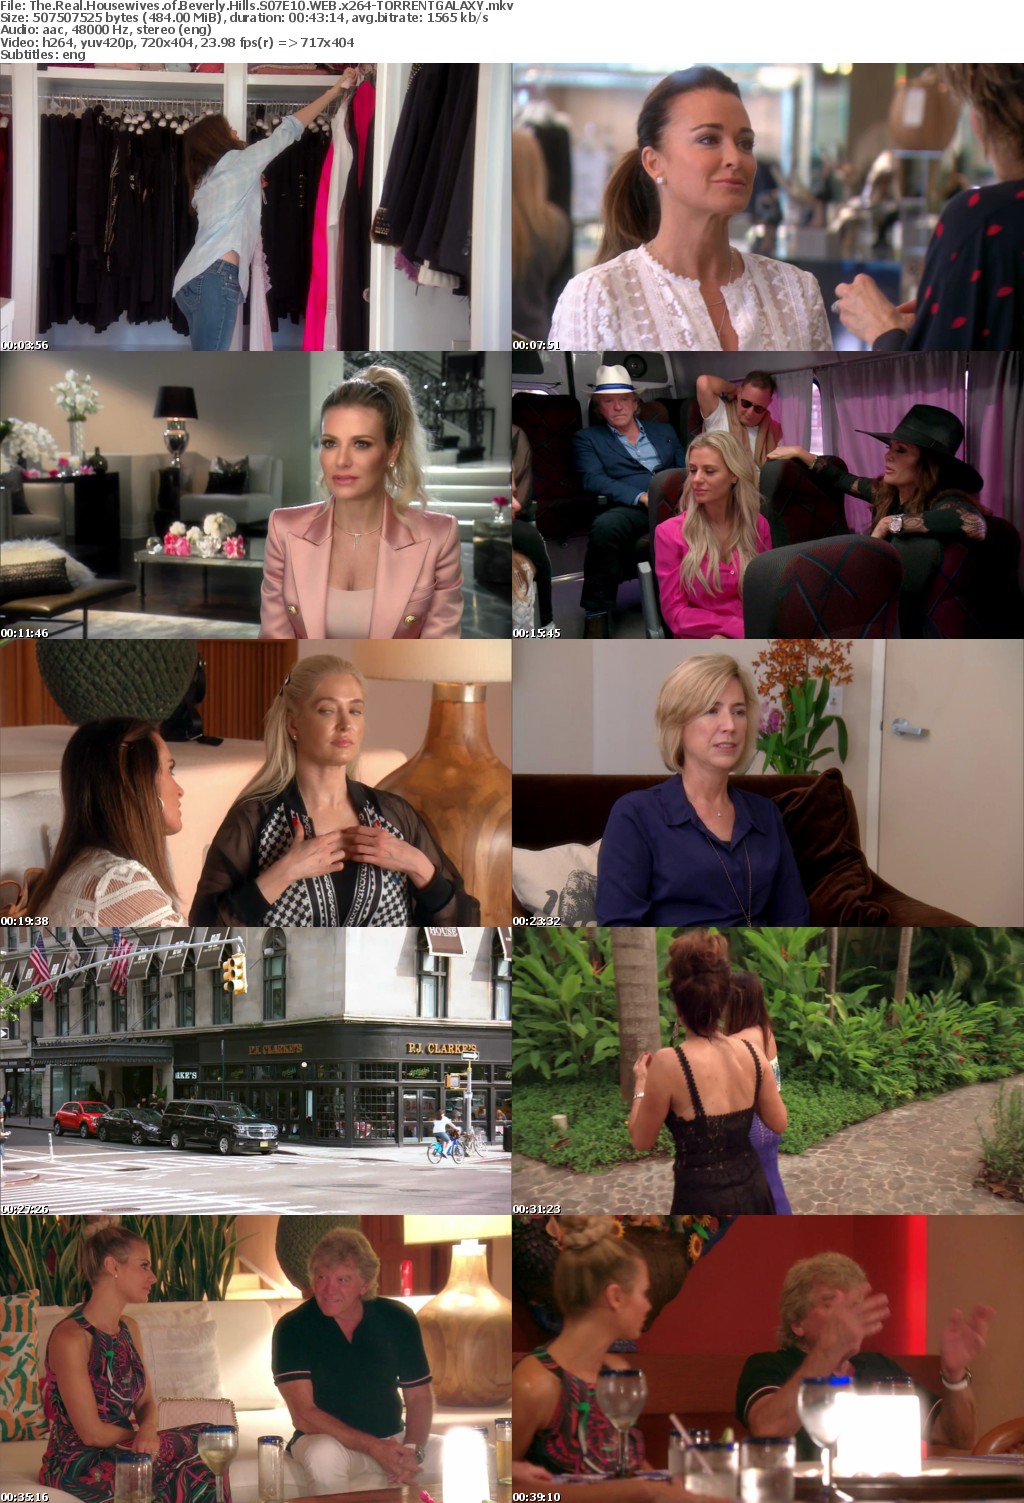 The Real Housewives of Beverly Hills S07E10 WEB x264-GALAXY